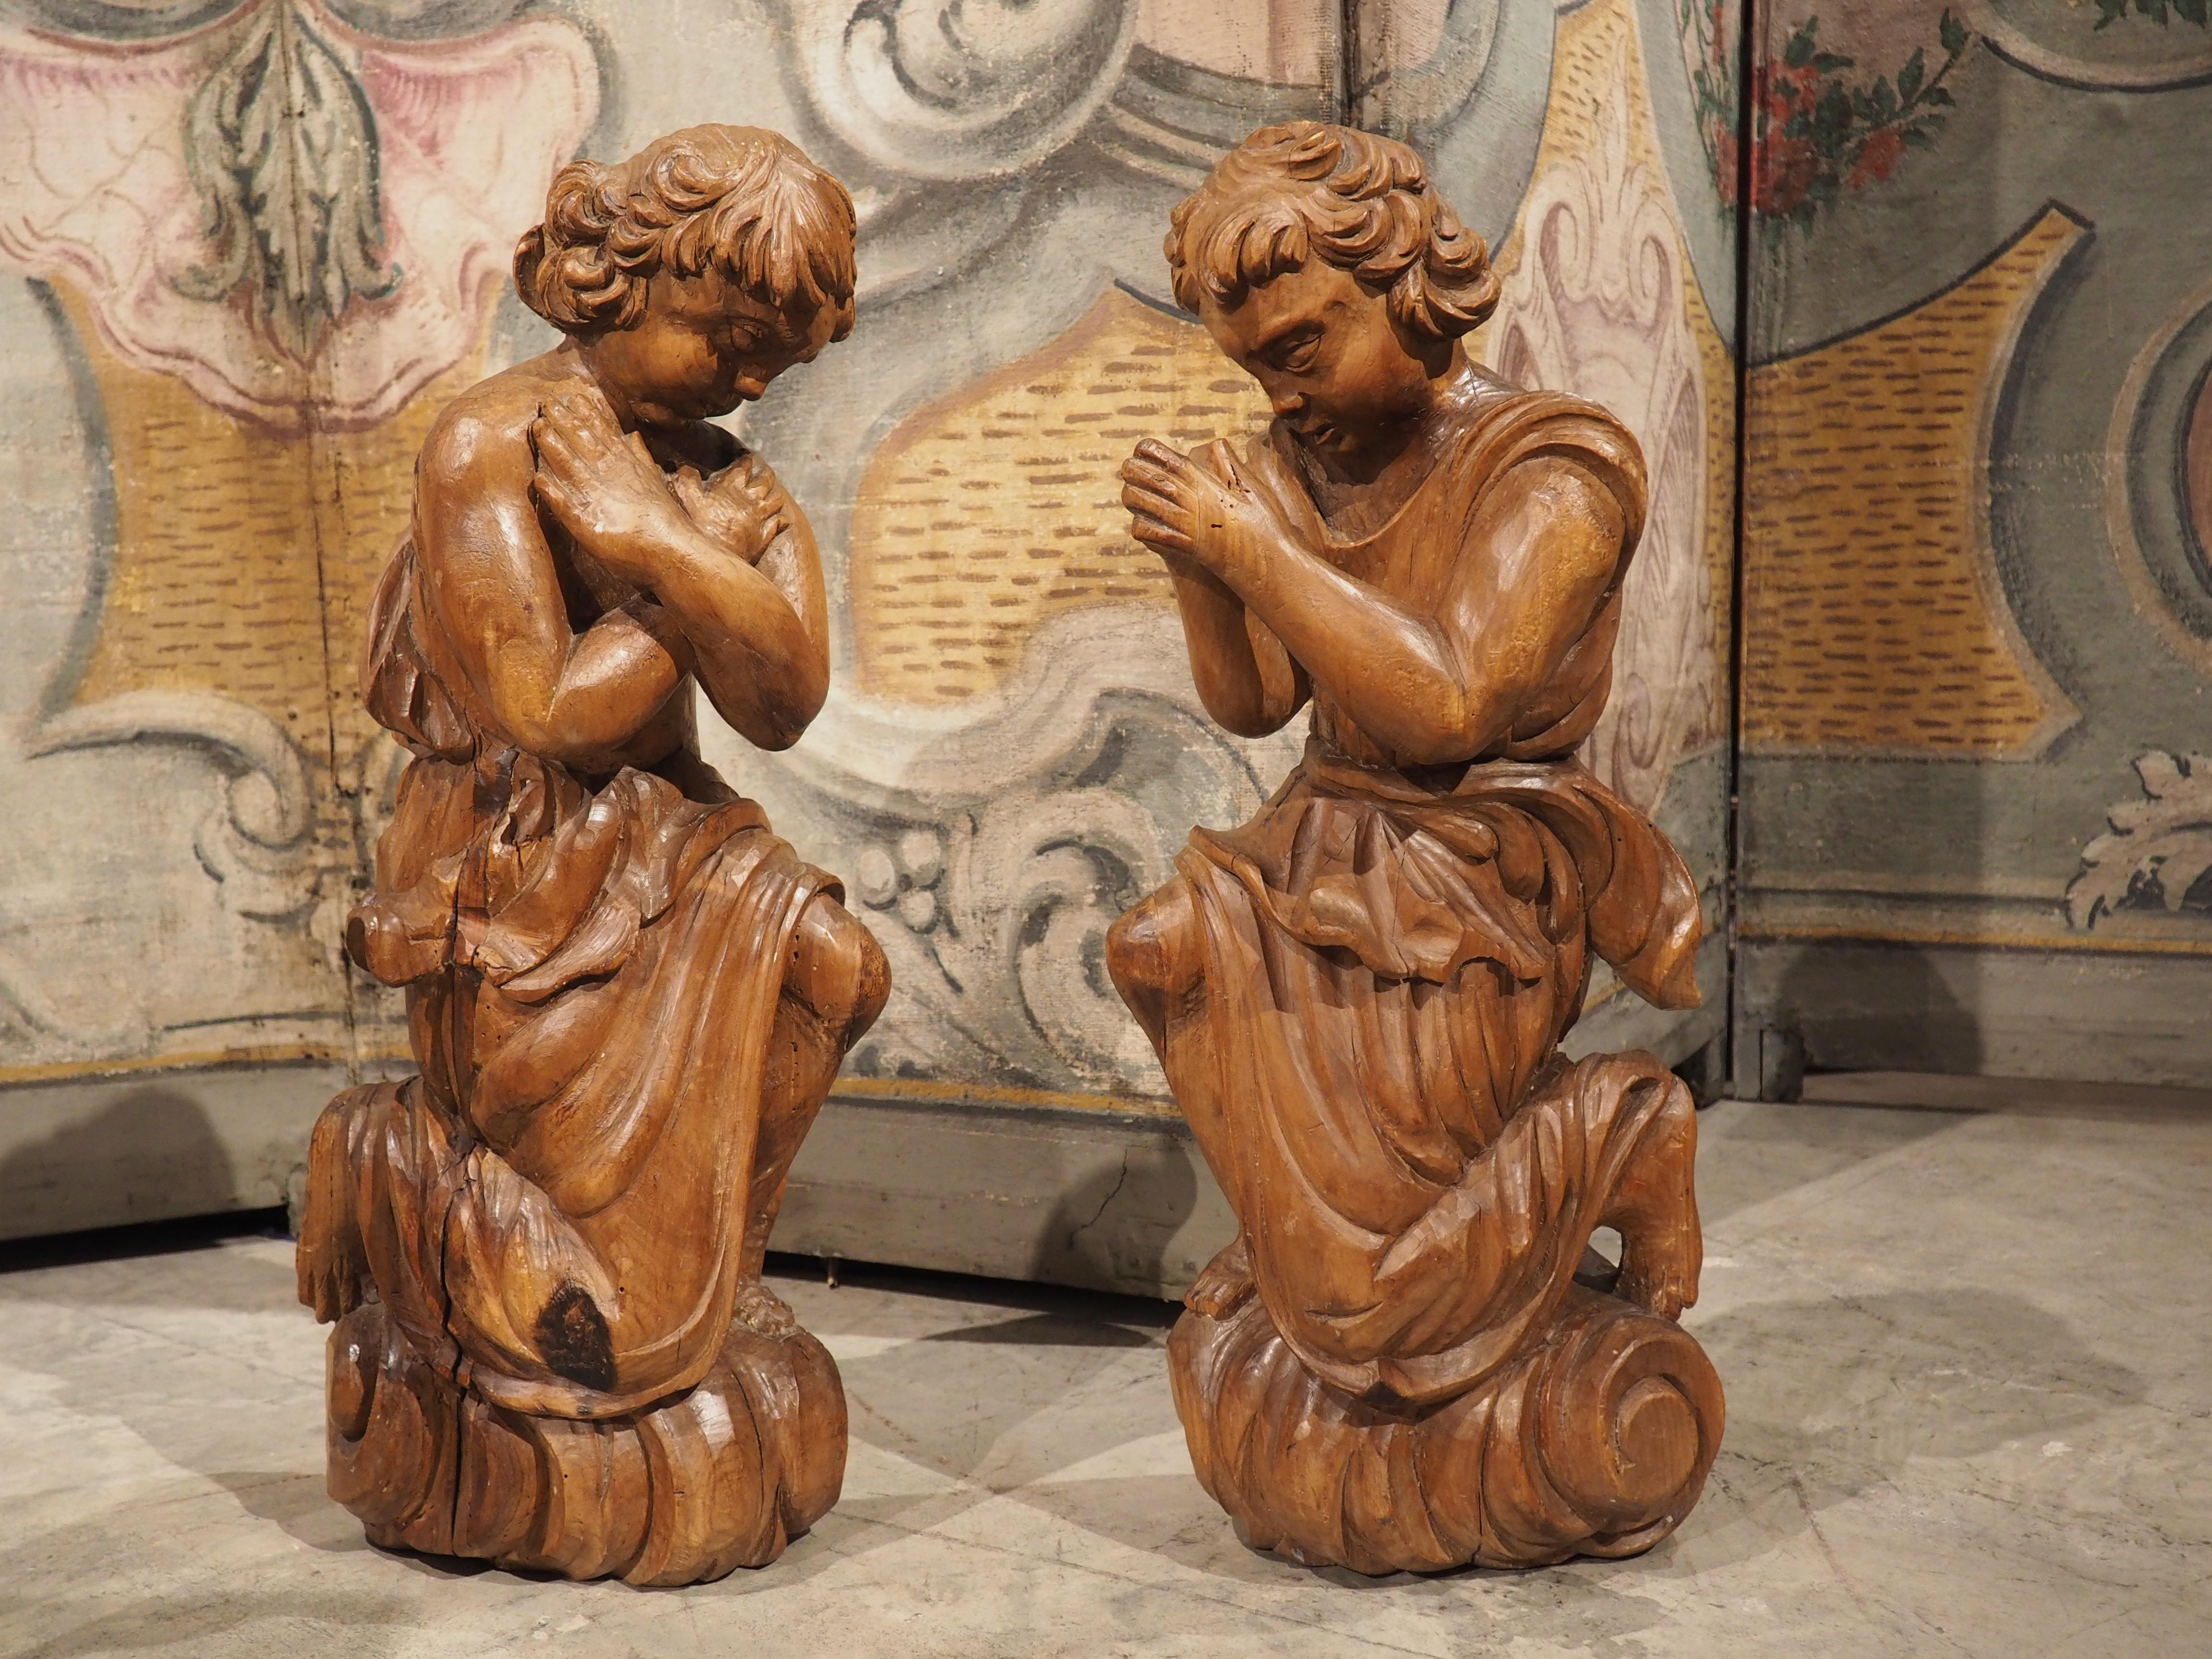 Hand-carved in the 1700’s in France, this pair of wooden angels are portrayed in similar genuflecting positions. One angel is depicted with right knee on the ground and arms crossed over the chest; the other one has the left knee down with hands